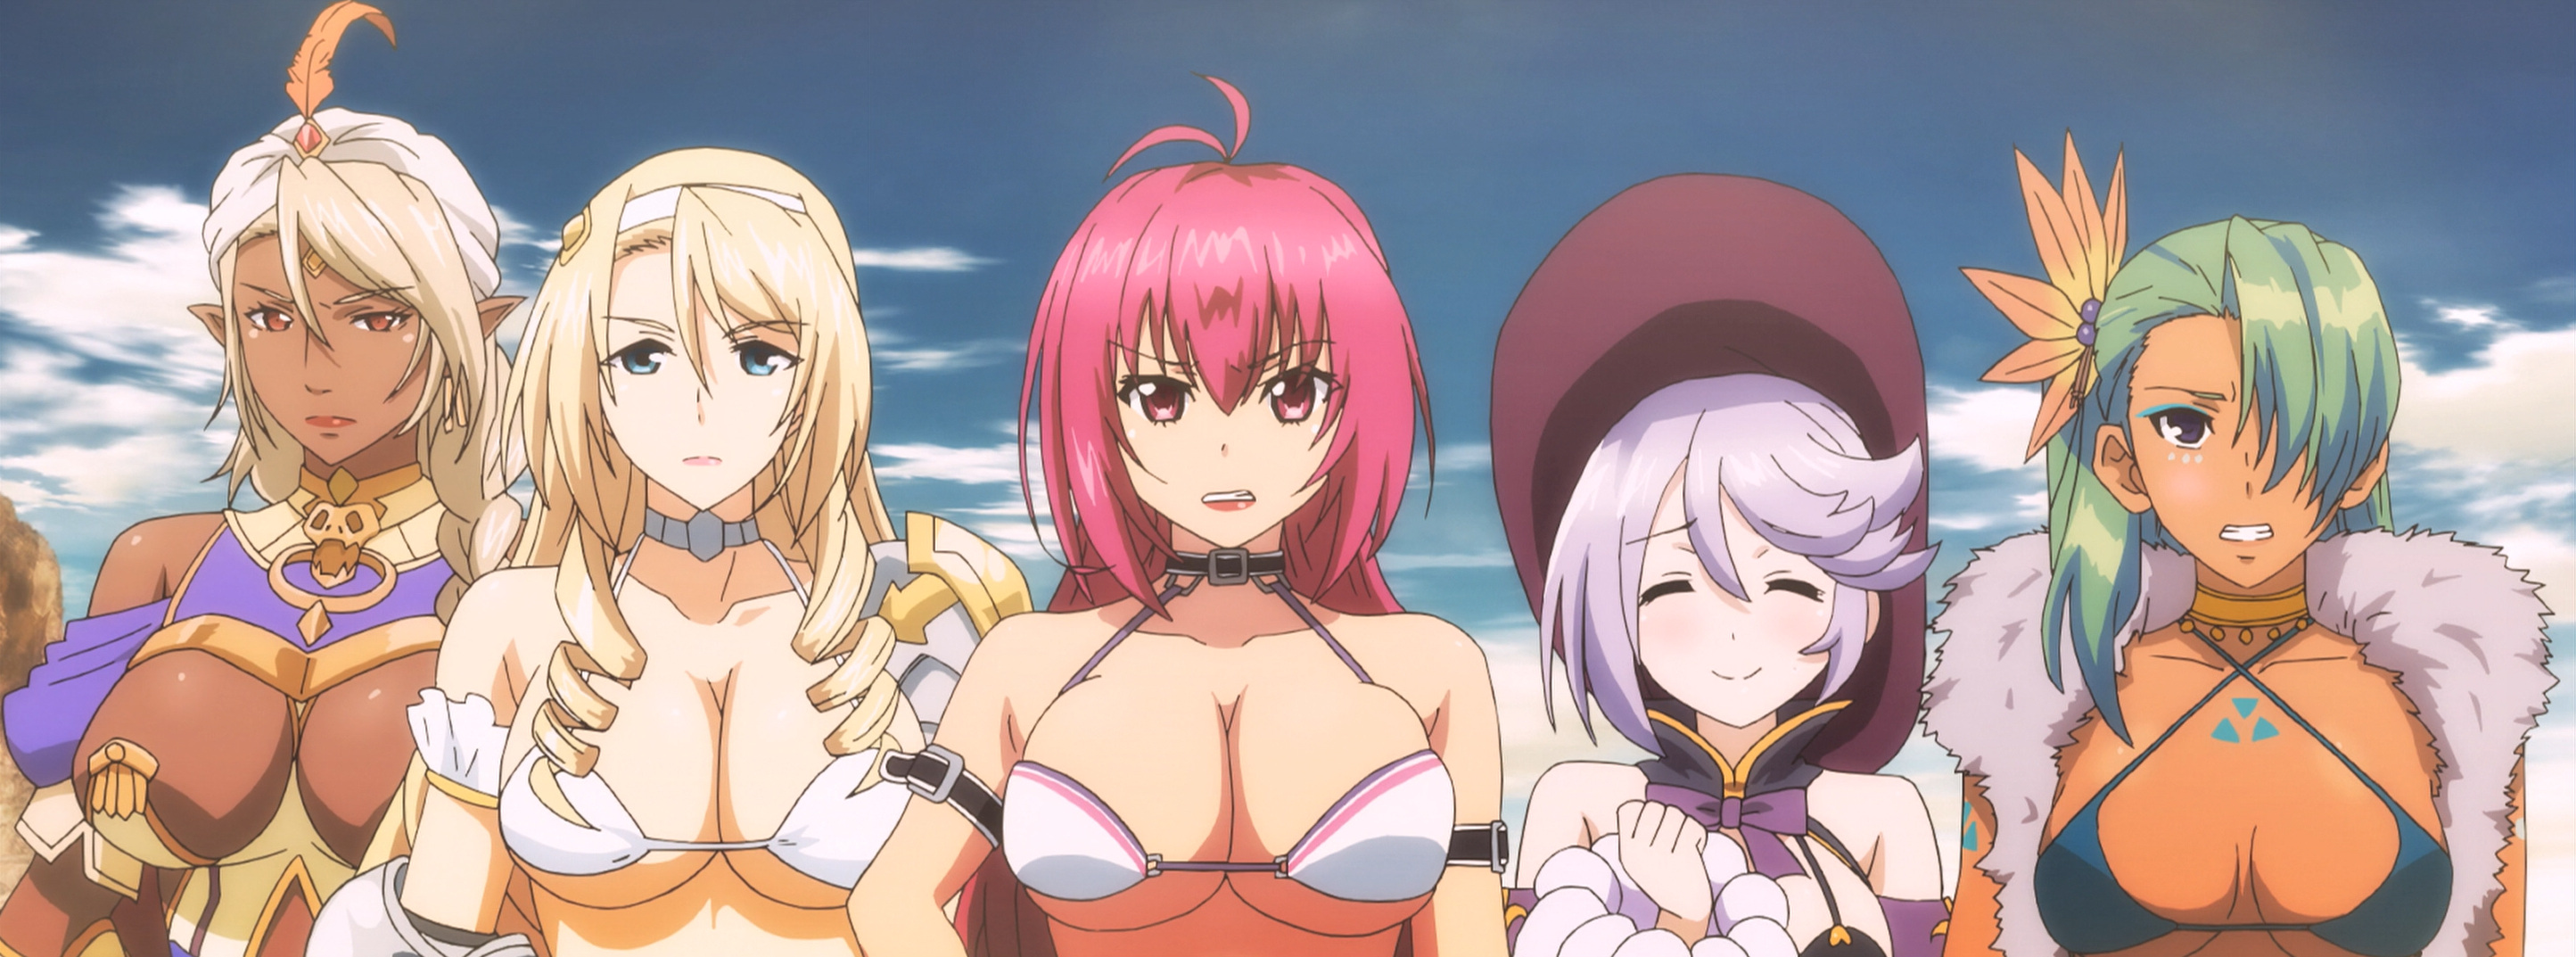 Though the Bikini Warriors stand strong as four, they’re willing to take on...